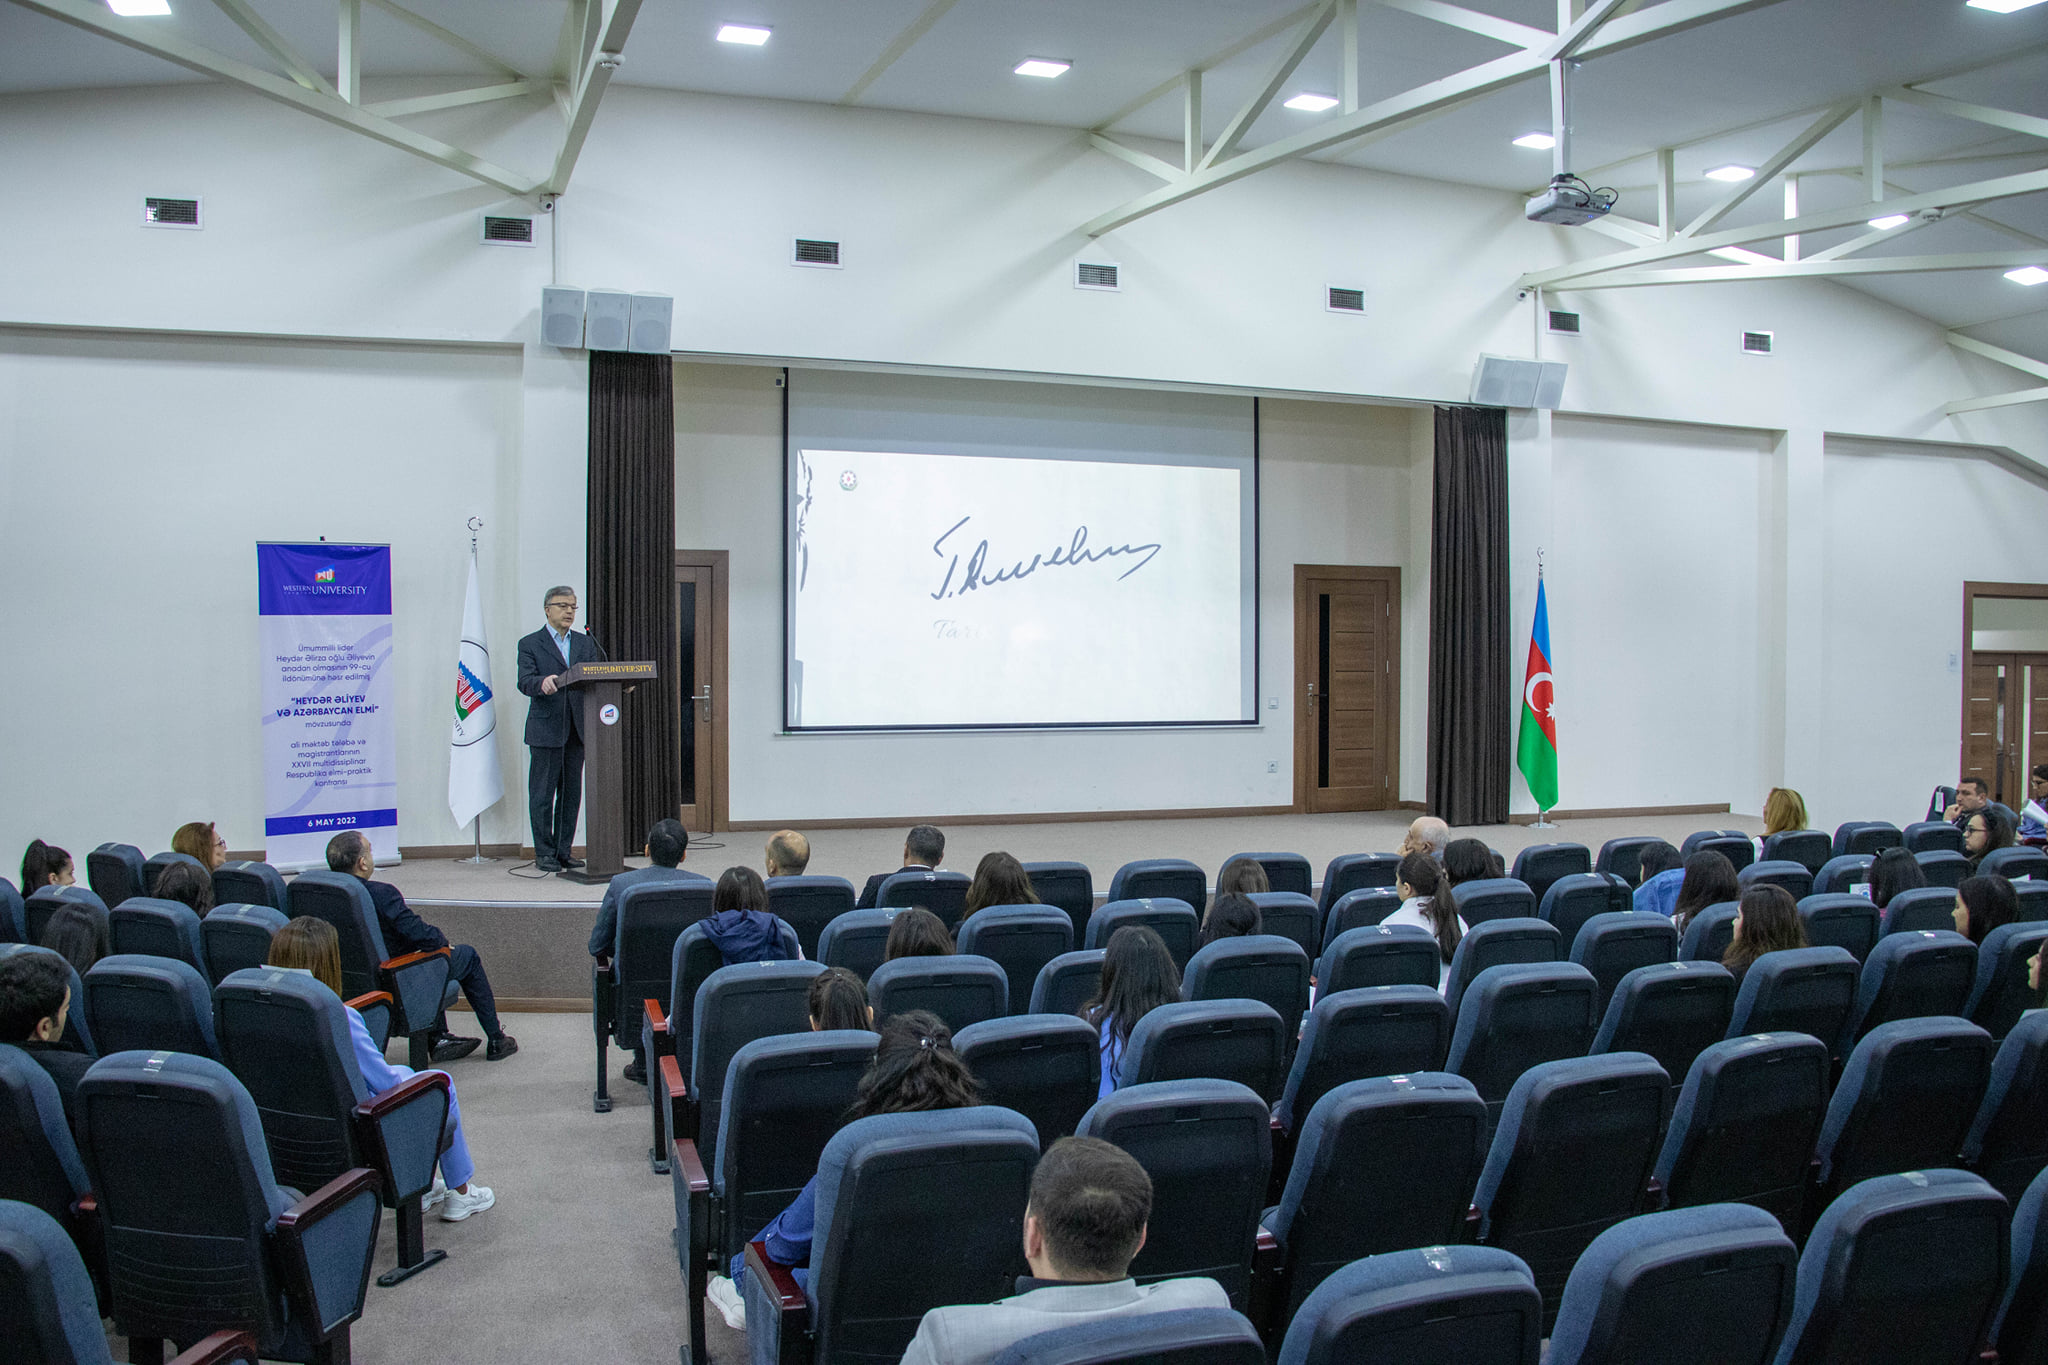 A conference on "Heydar Aliyev and Azerbaijani science" was held at Western Caspian University